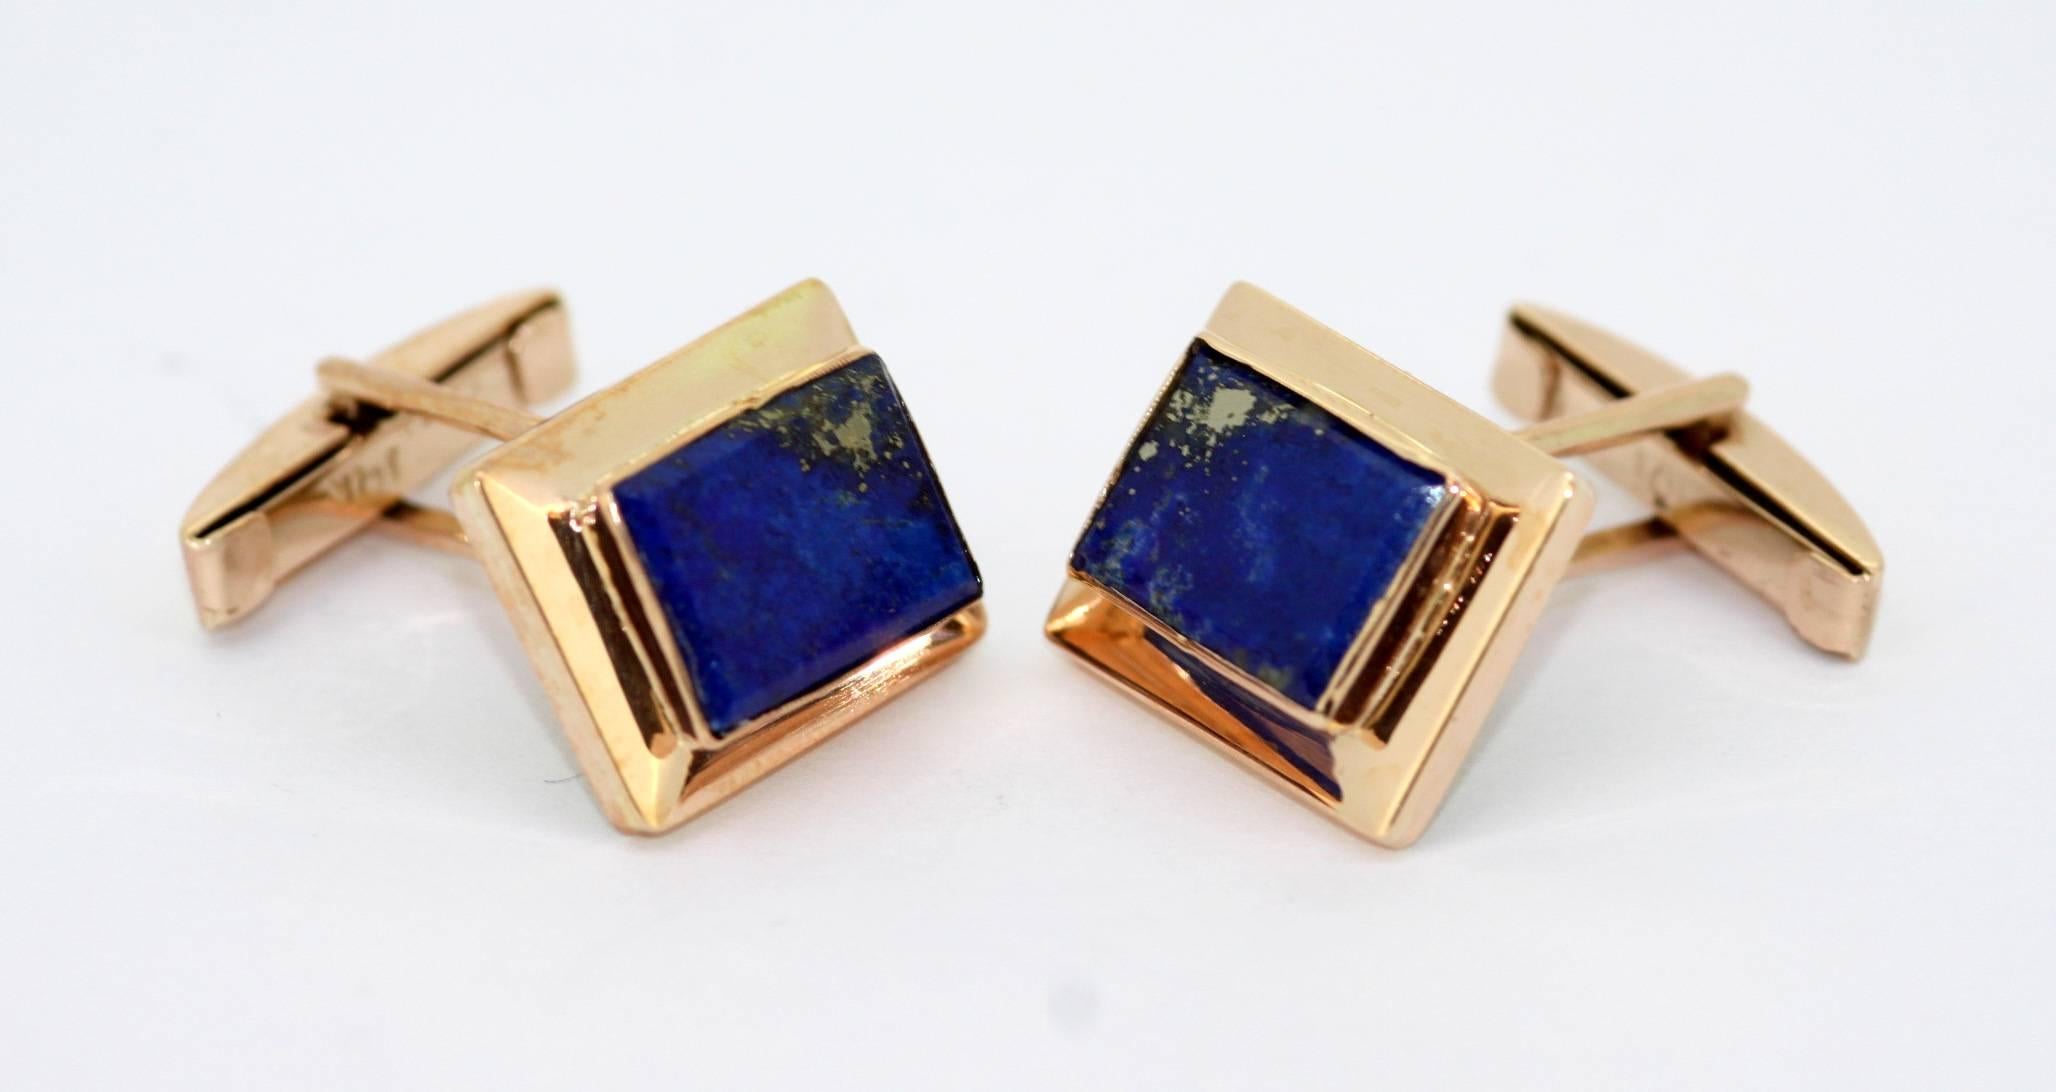 14K yellow gold cufflinks with lapis lazuli
1980's
Hallmarked 14K

Dimensions - 
Size : 2.8 x 2 x 1.45 cm
Total weight : 10 grams

Condition: Minor wear from general usage, otherwise excellent condition, please see pictures.